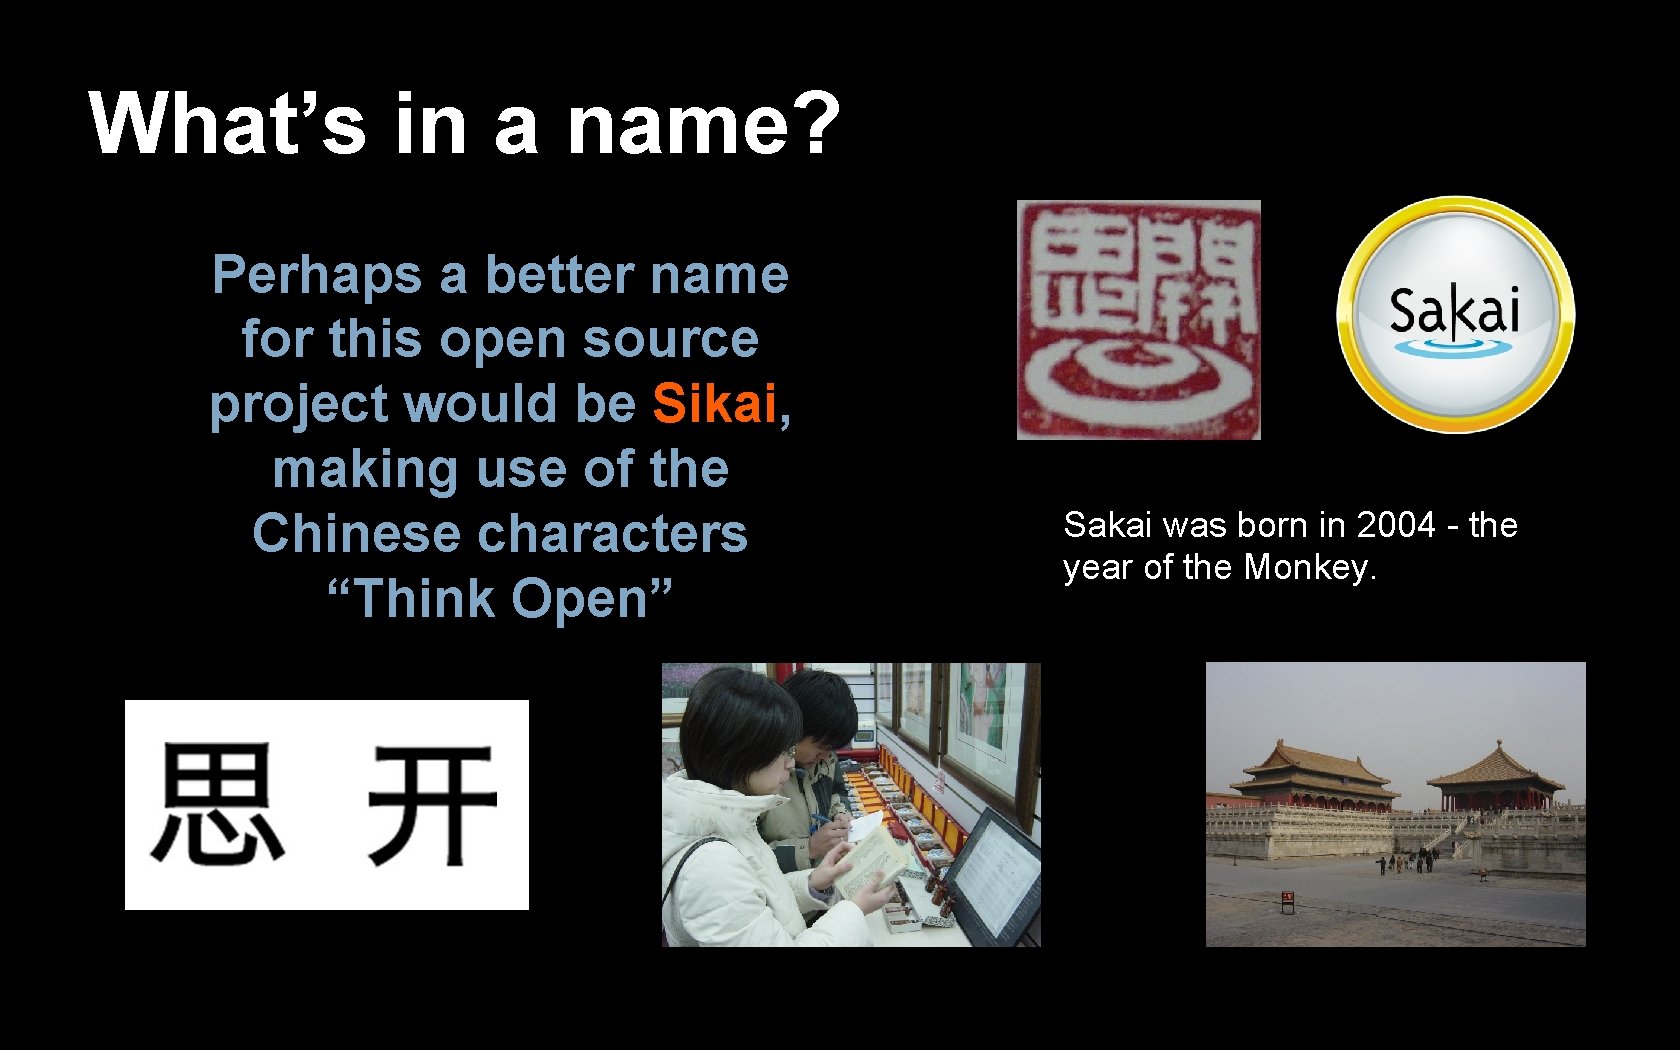 What’s in a name? Perhaps a better name for this open source project would